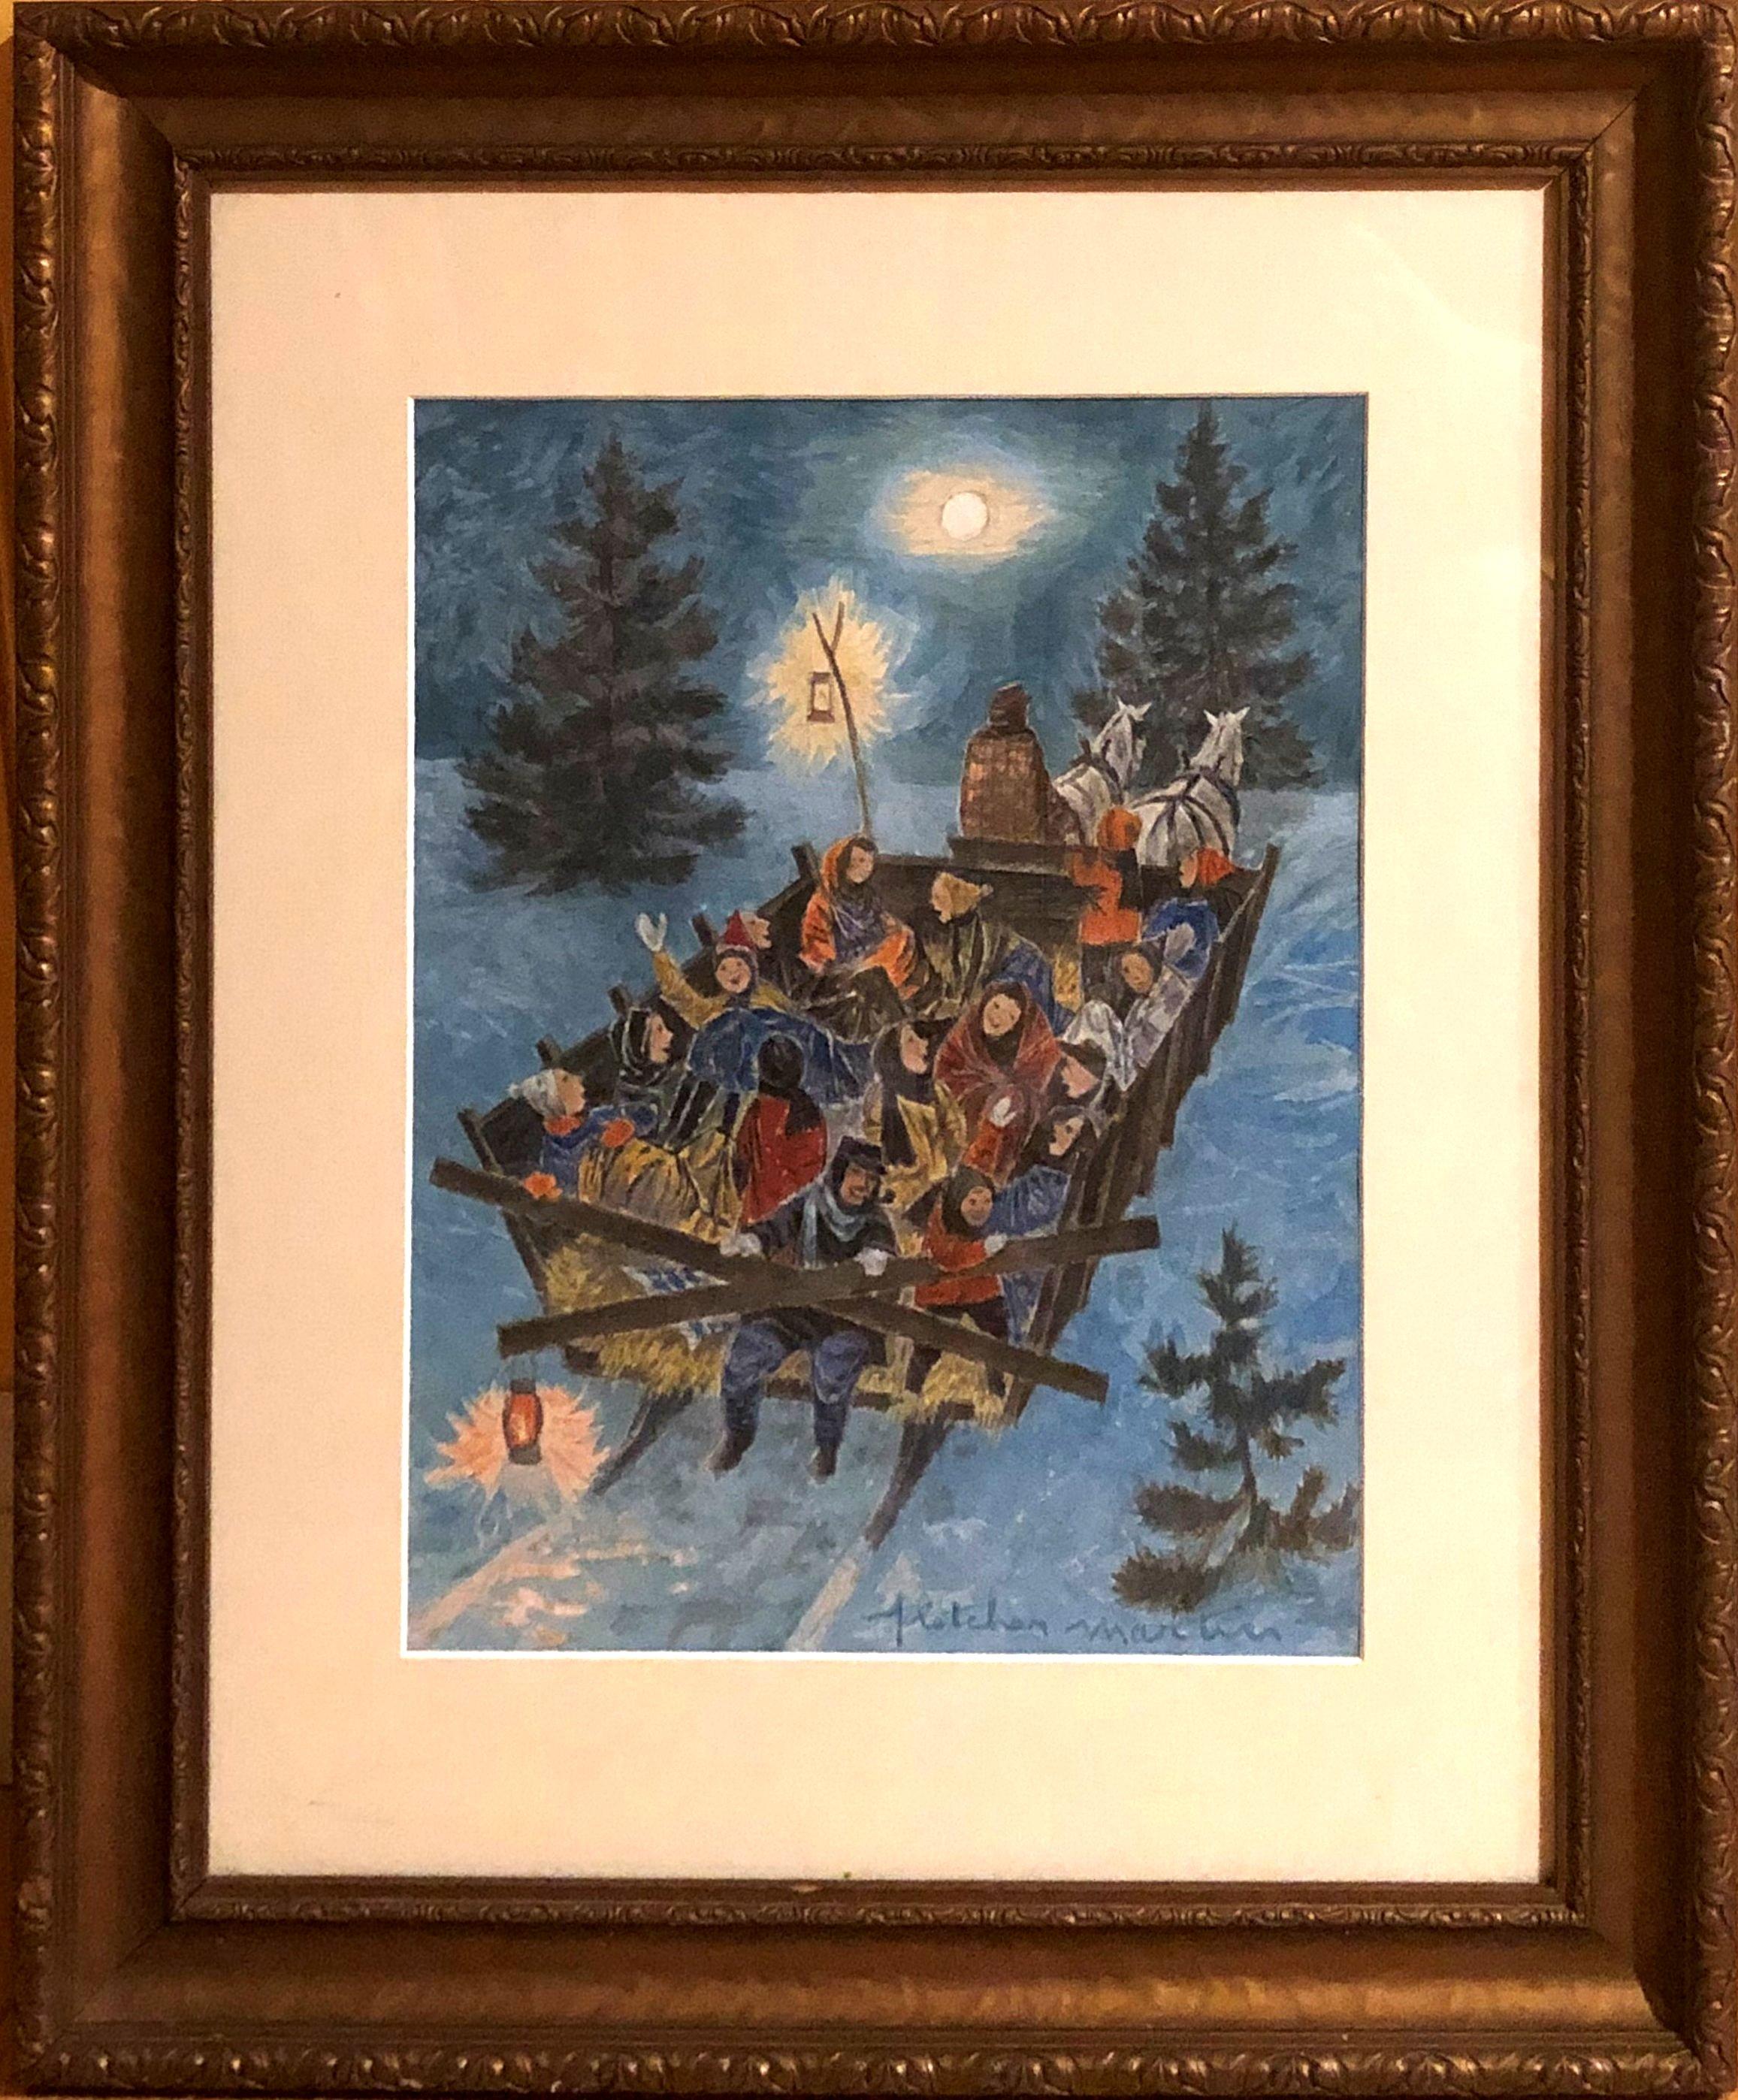 Fletcher Martin (1904 - 1979)
Sleigh Ride, Woodstock, New York circa 1955
Watercolor on paper
14 x 11 inches
Signed lower right

Provenance:
James Cox Gallery at Woodstock, Willow, New York

Fletcher Martin was born in Palisade, Colorado, the son of